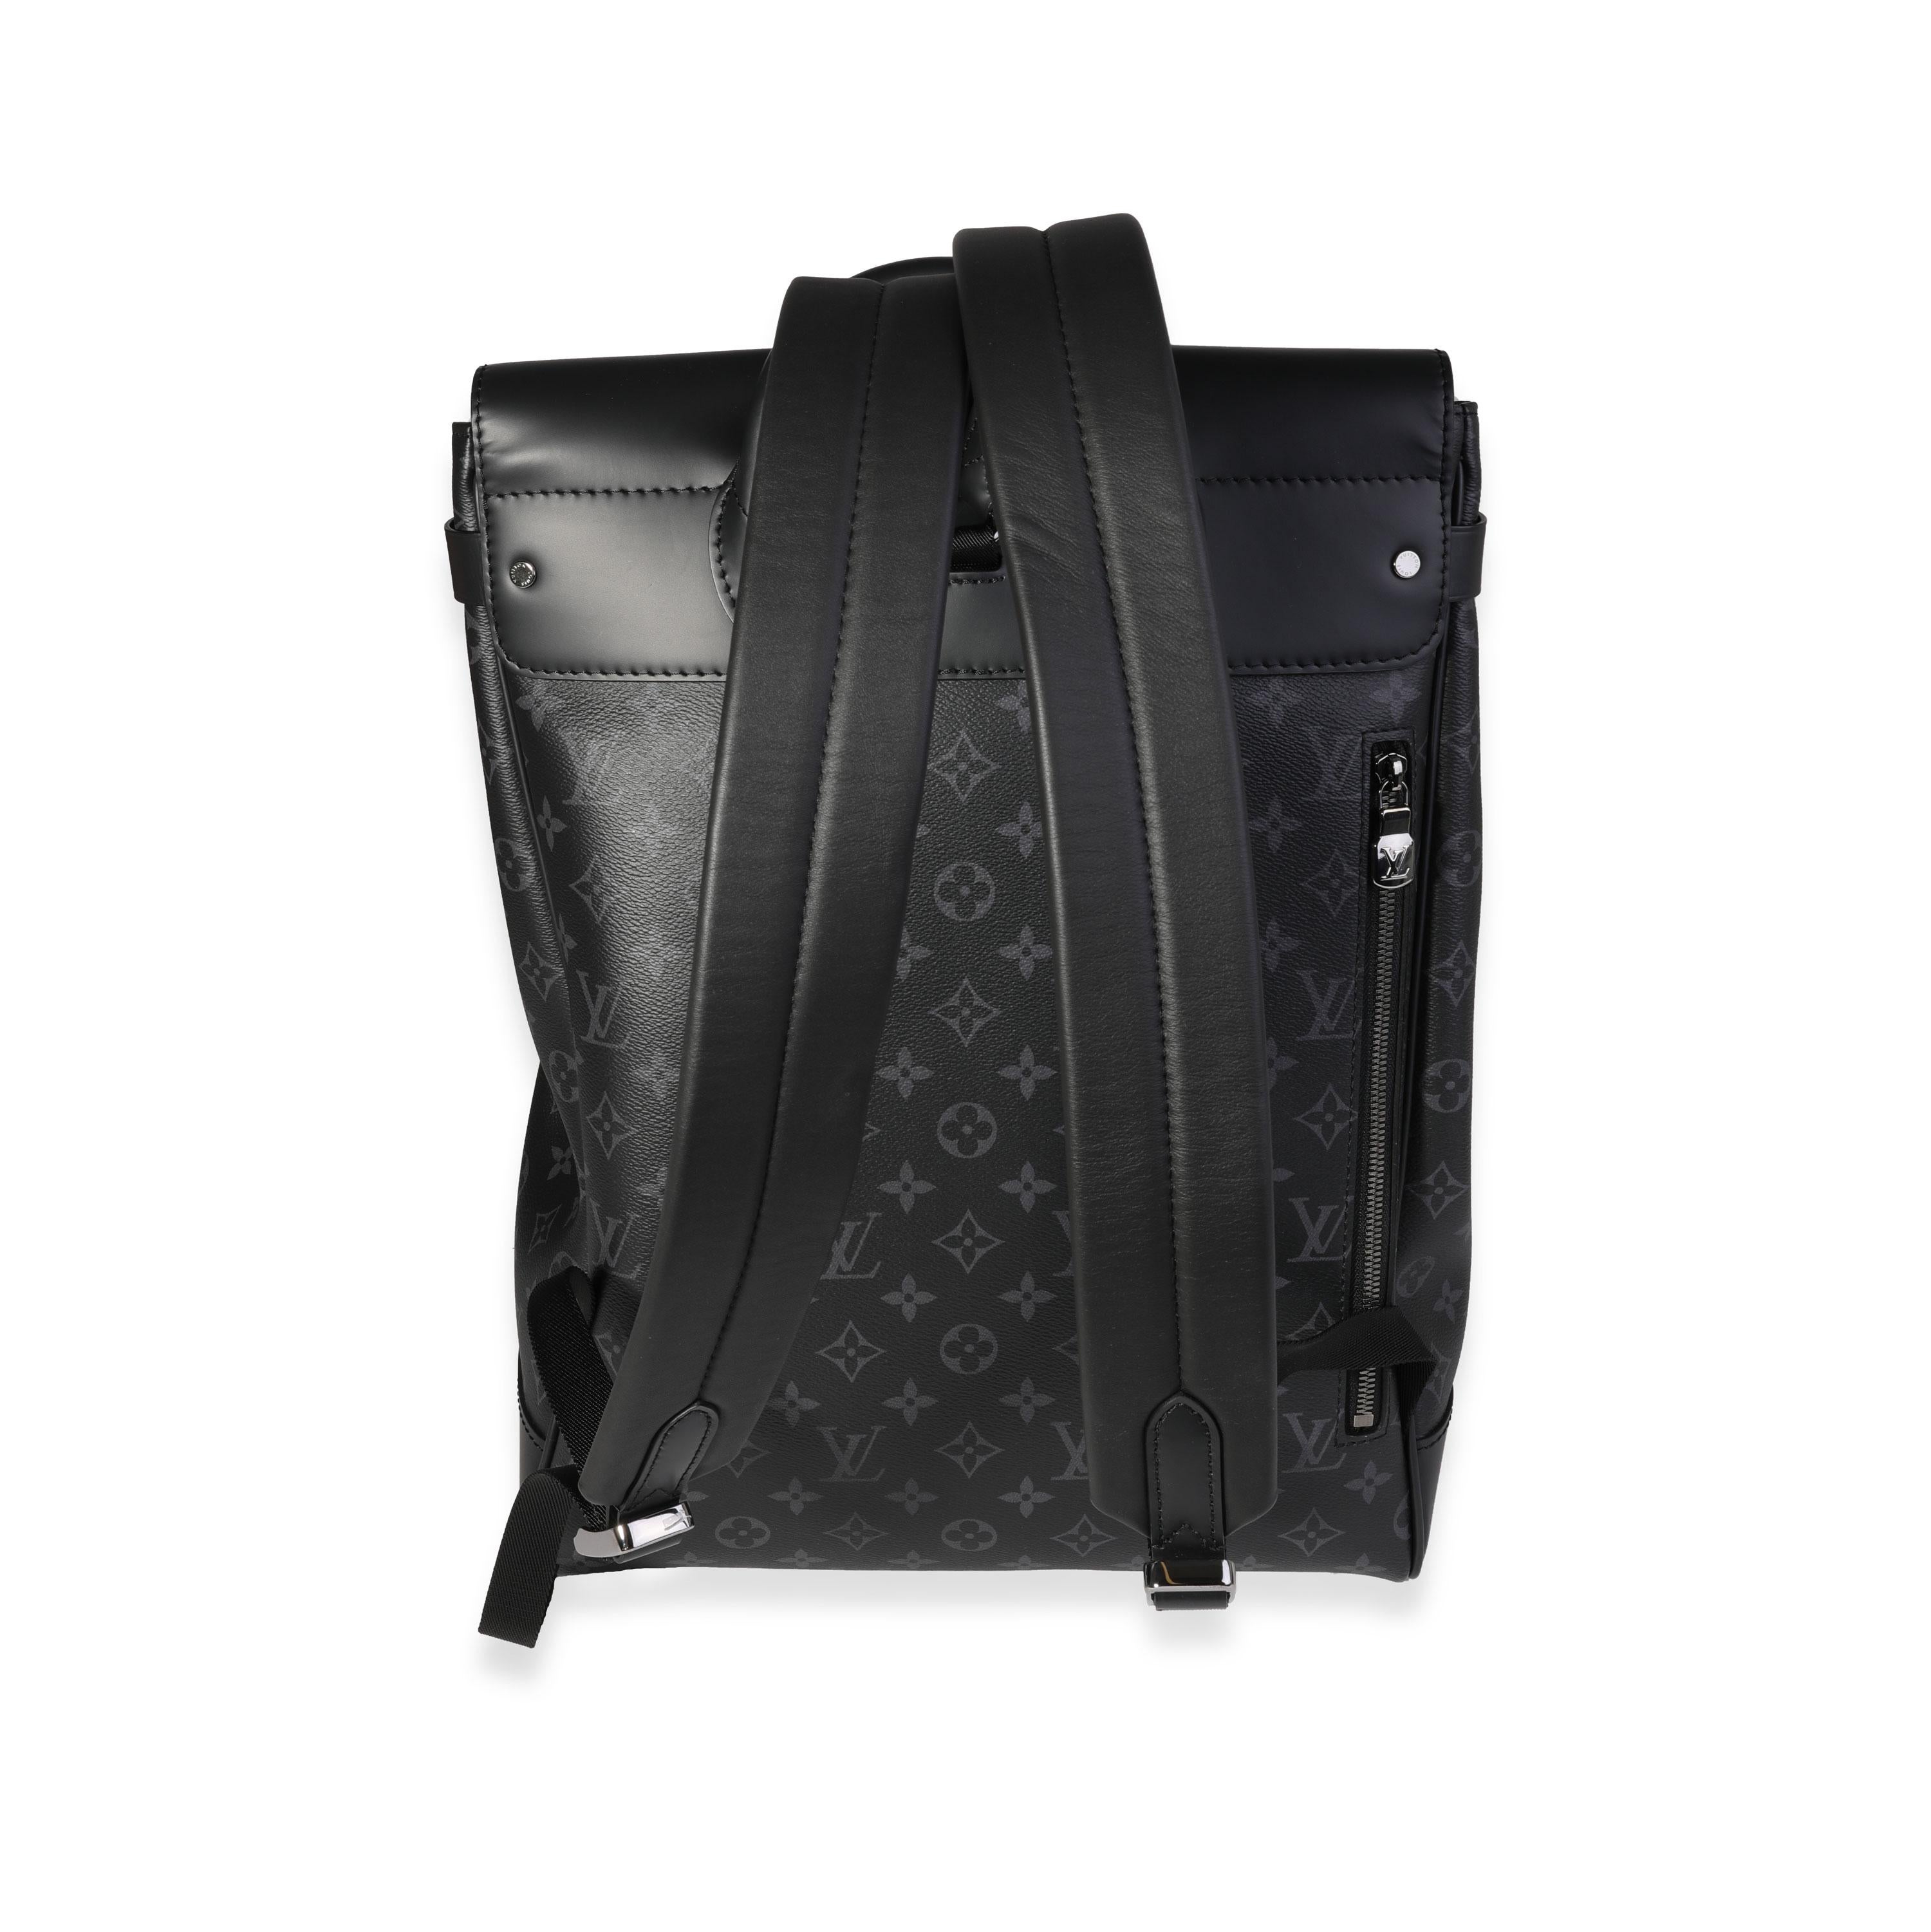 Listing Title: Louis Vuitton Monogram Eclipse Steamer Backpack
SKU: 120450
MSRP: 3100.00
Condition: Pre-owned 
Handbag Condition: Excellent
Condition Comments: Excellent Condition. Minor spots to exterior leather. Light scratching to